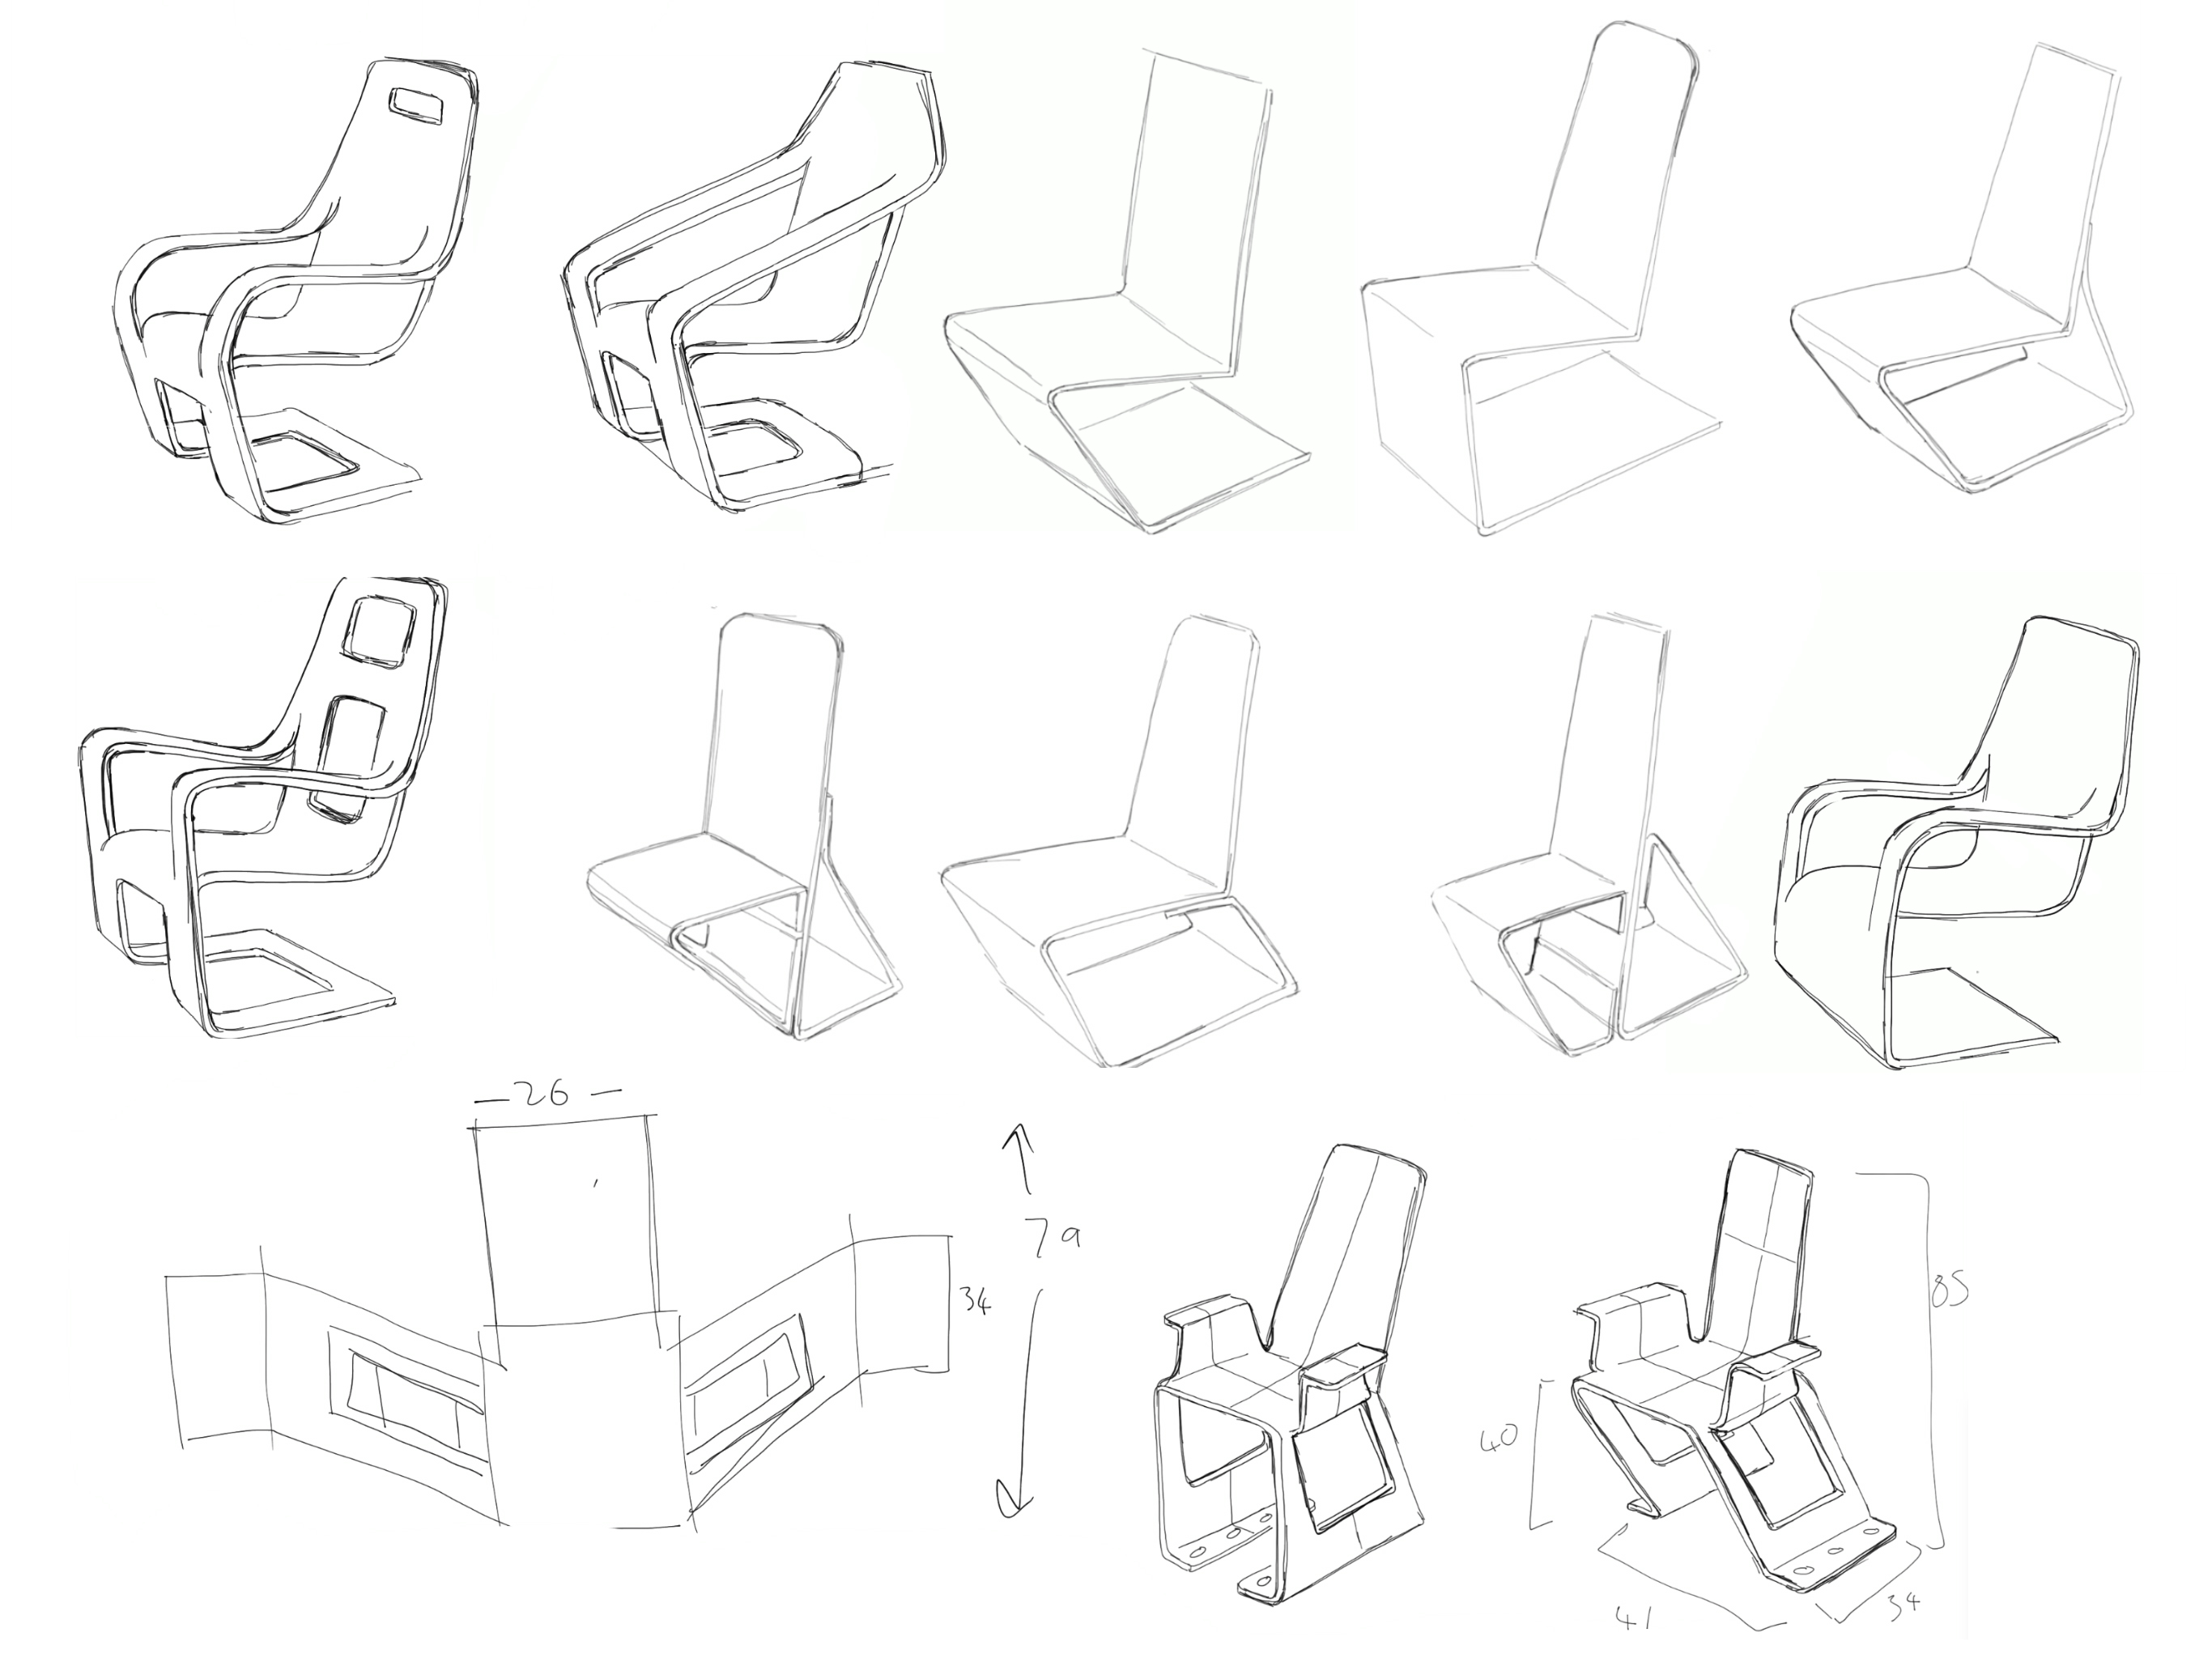 concept sketches of chairs